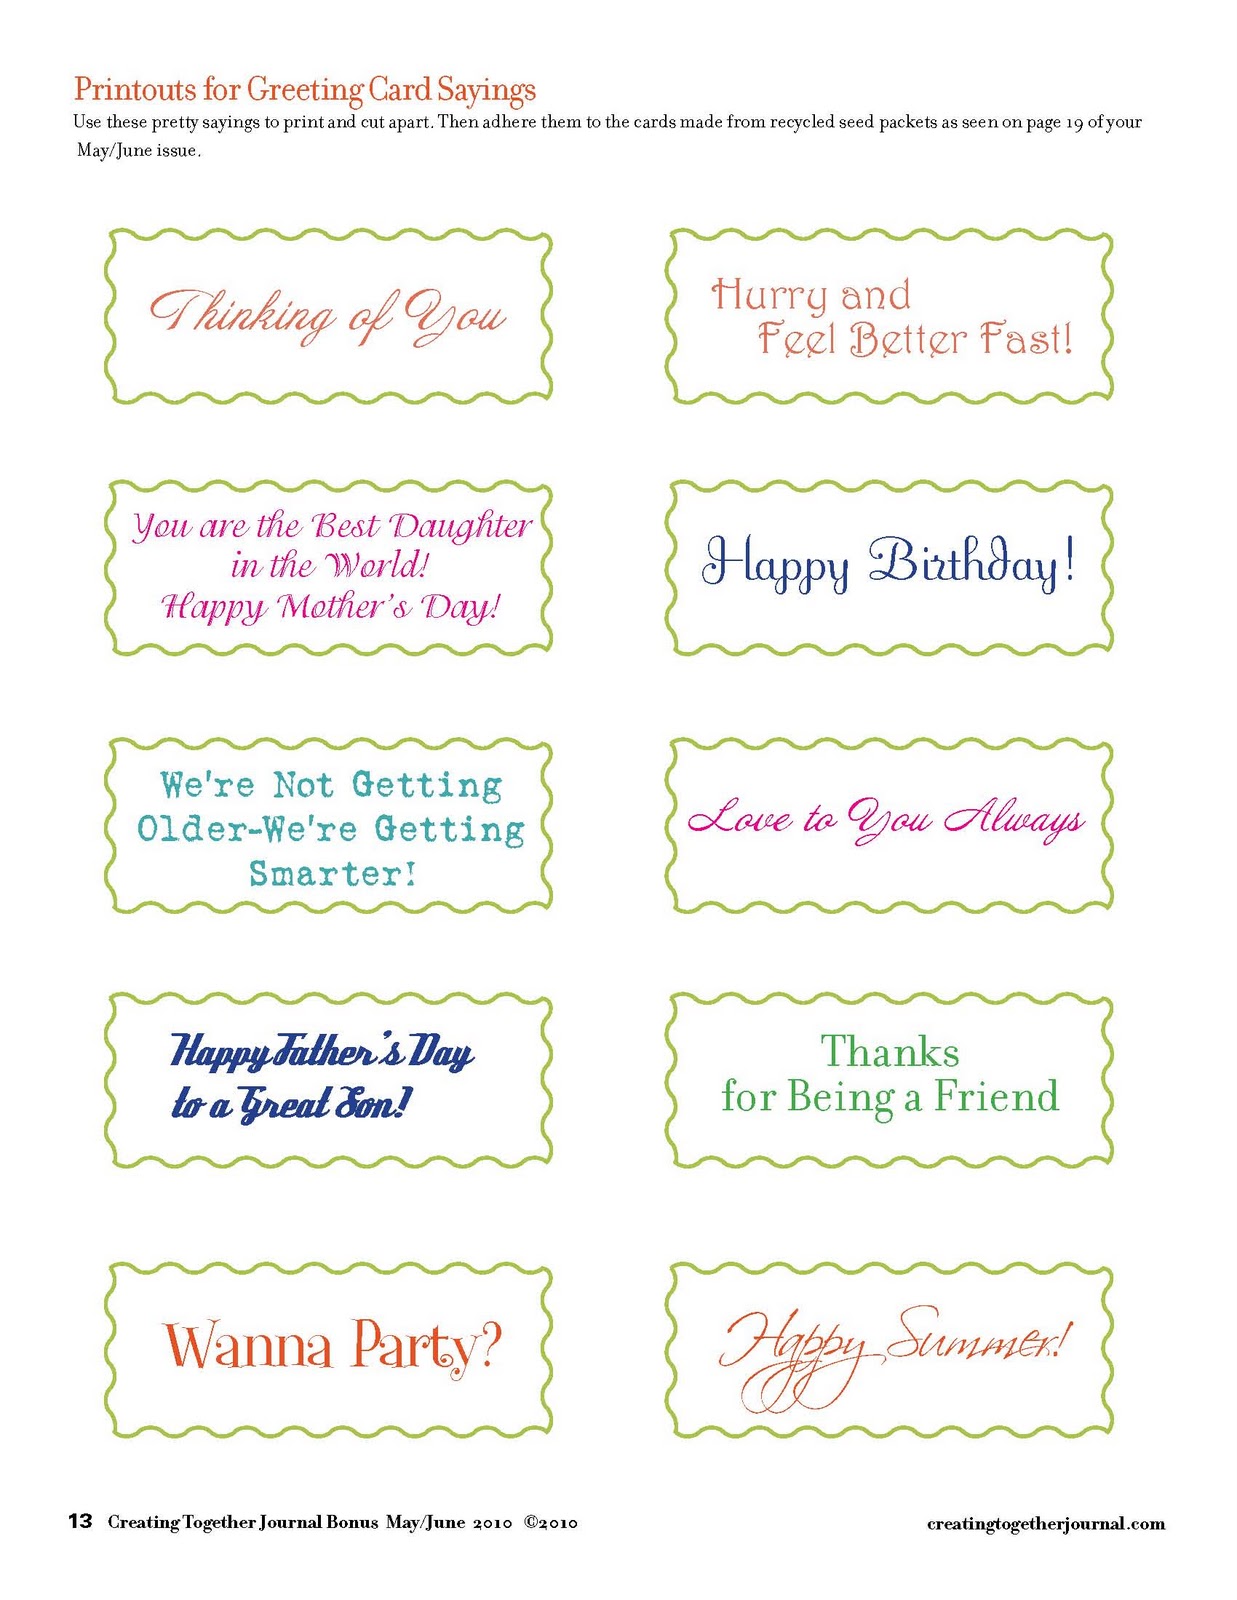 sentiments-circle-1-docrafts-verses-for-cards-card-sayings-greeting-card-sentiments